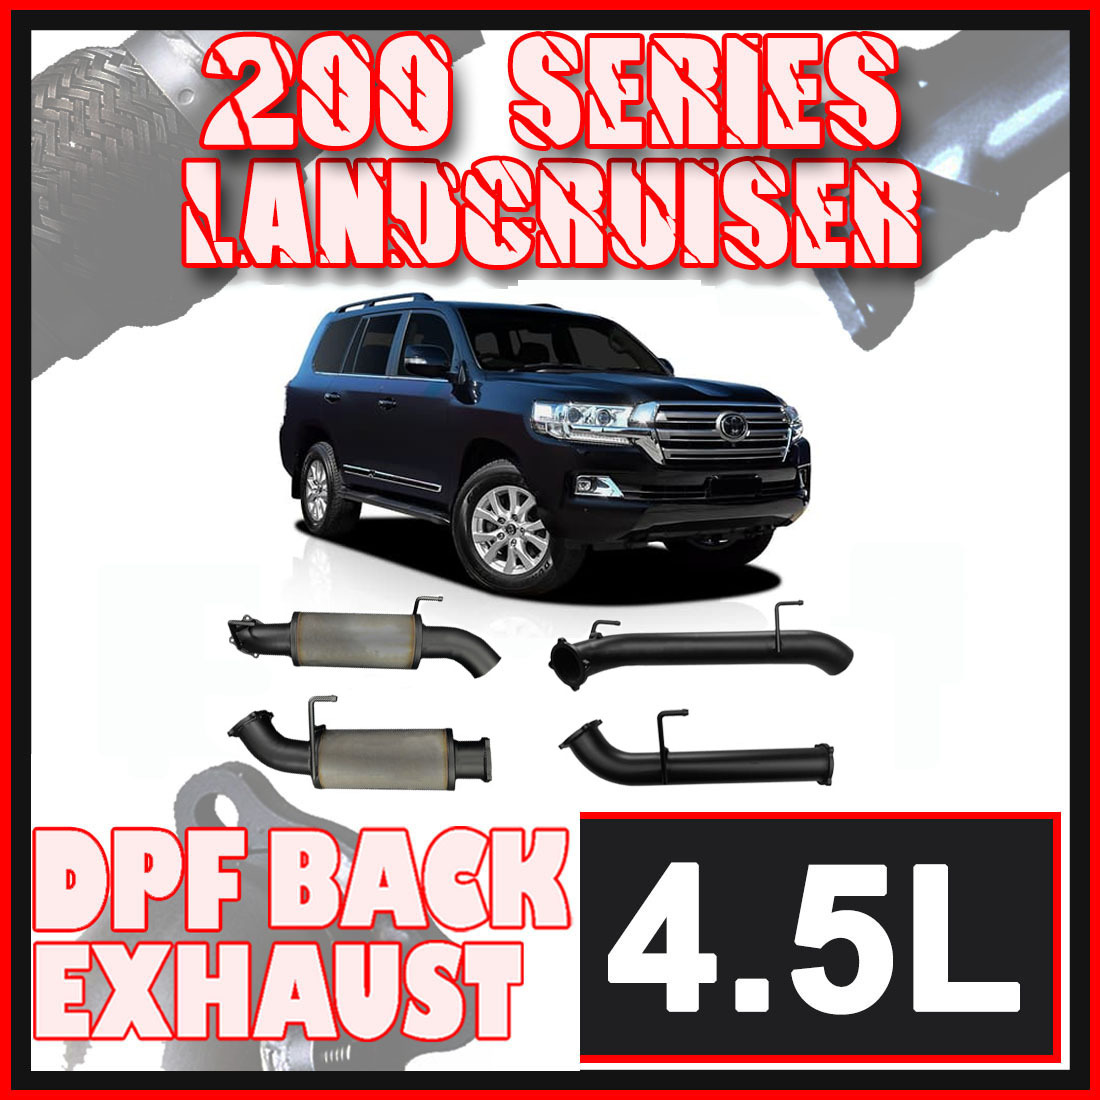 Toyota Landcruiser Exhaust 200 Series 4.5L V8 3" to 3.5" DPF Back Systems image